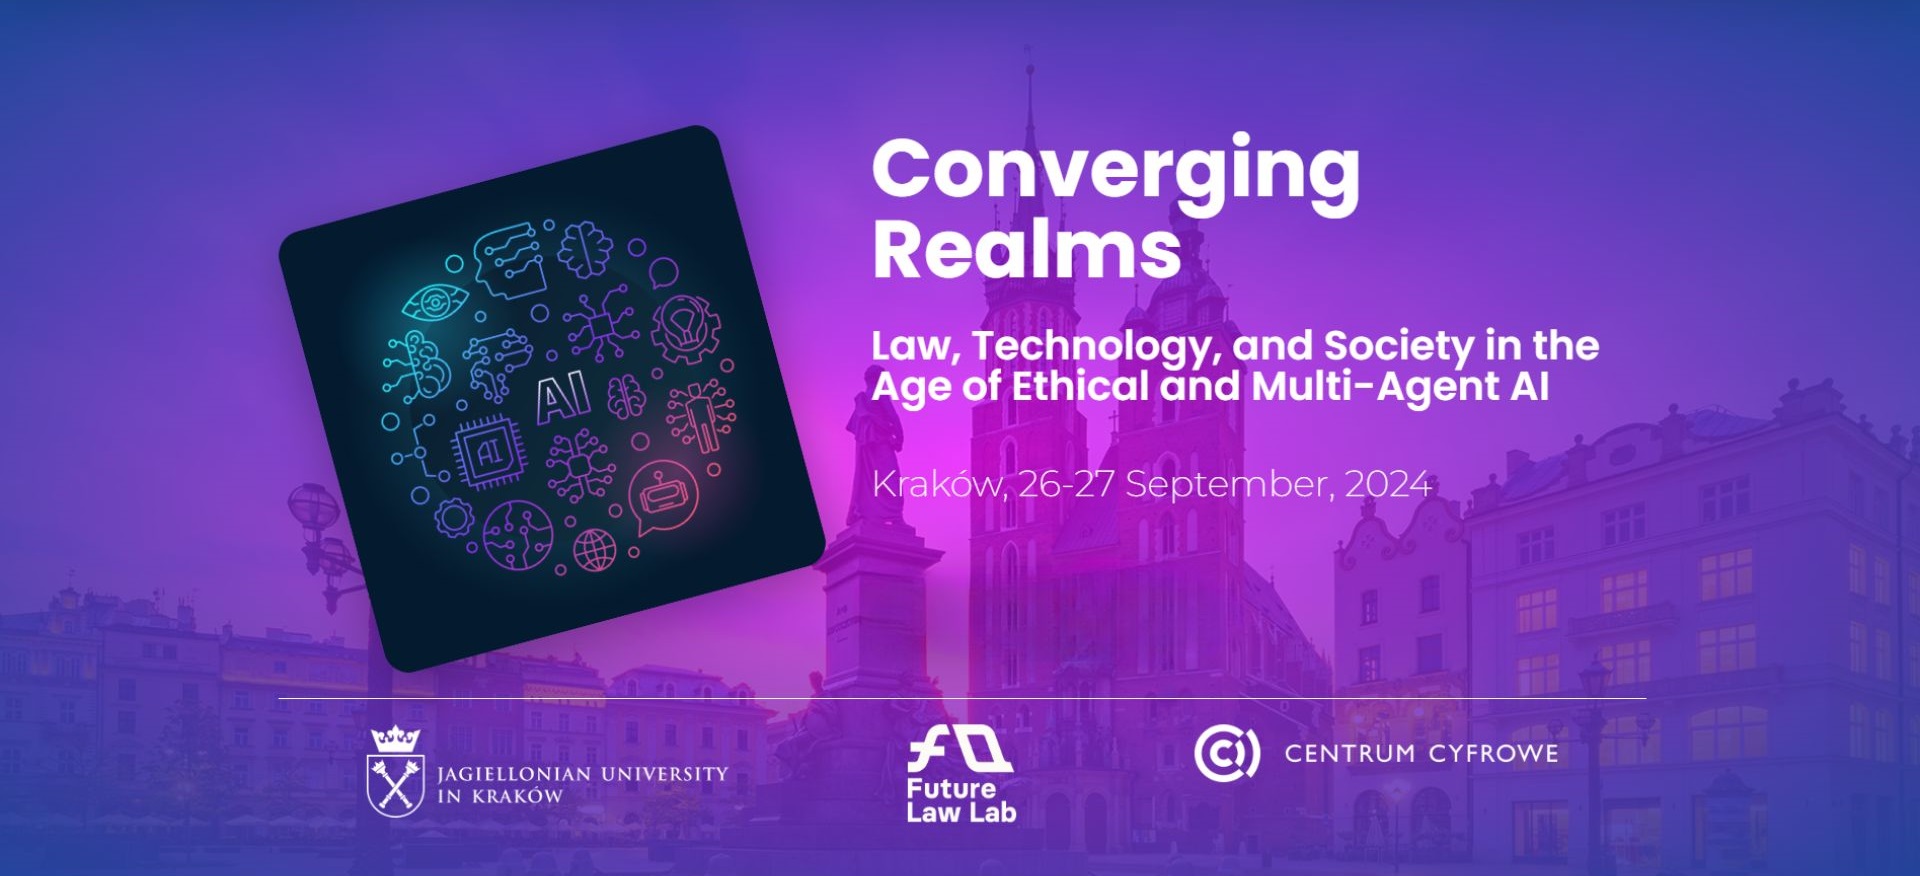 Converging Realms Conference